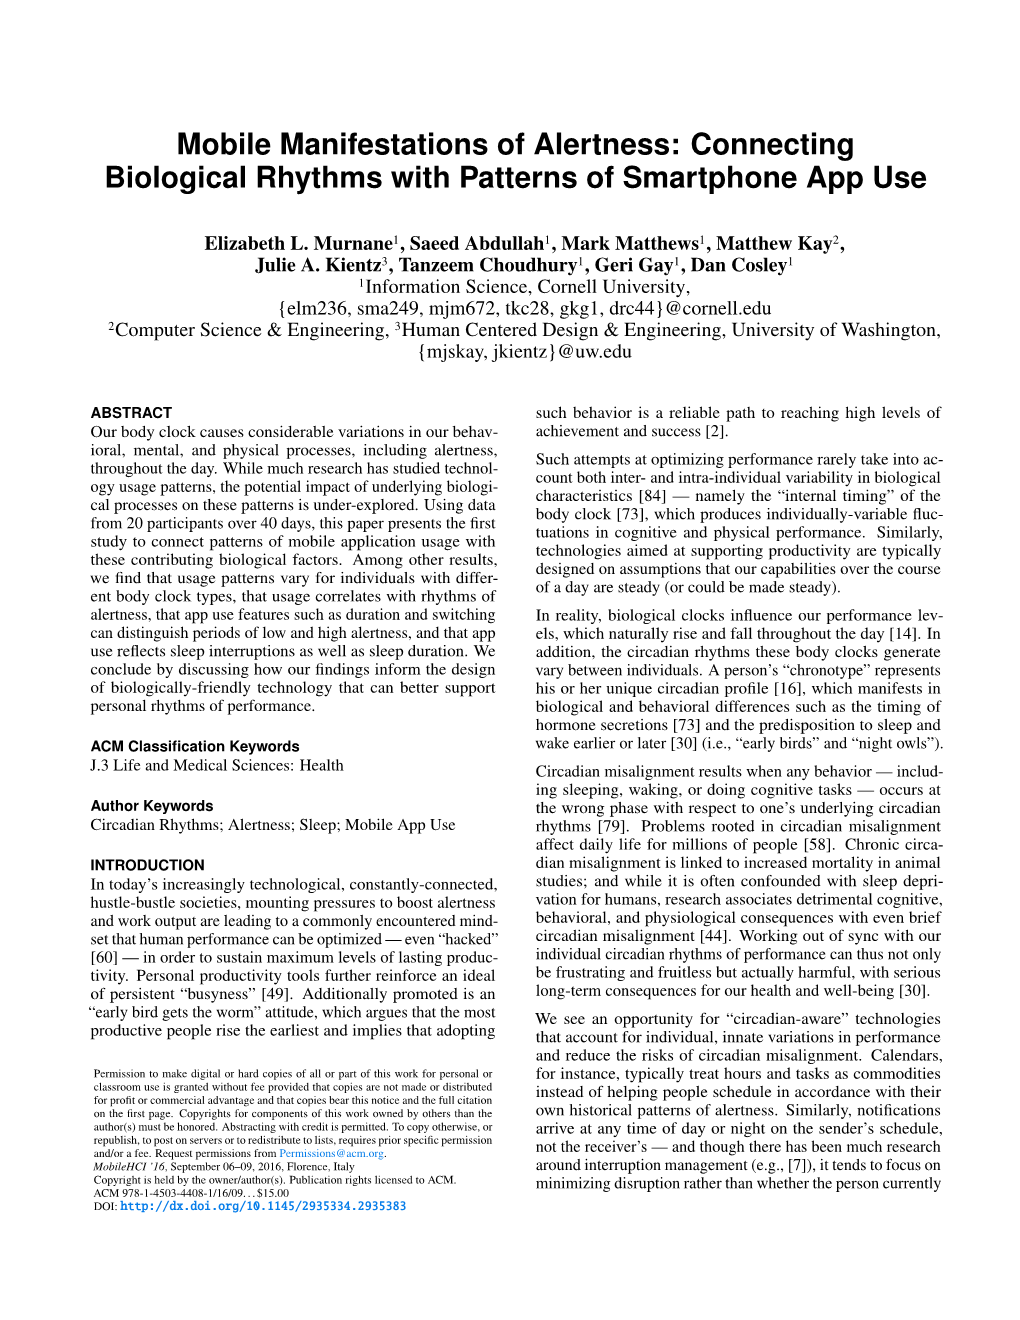 Connecting Biological Rhythms with Patterns of Smartphone App Use